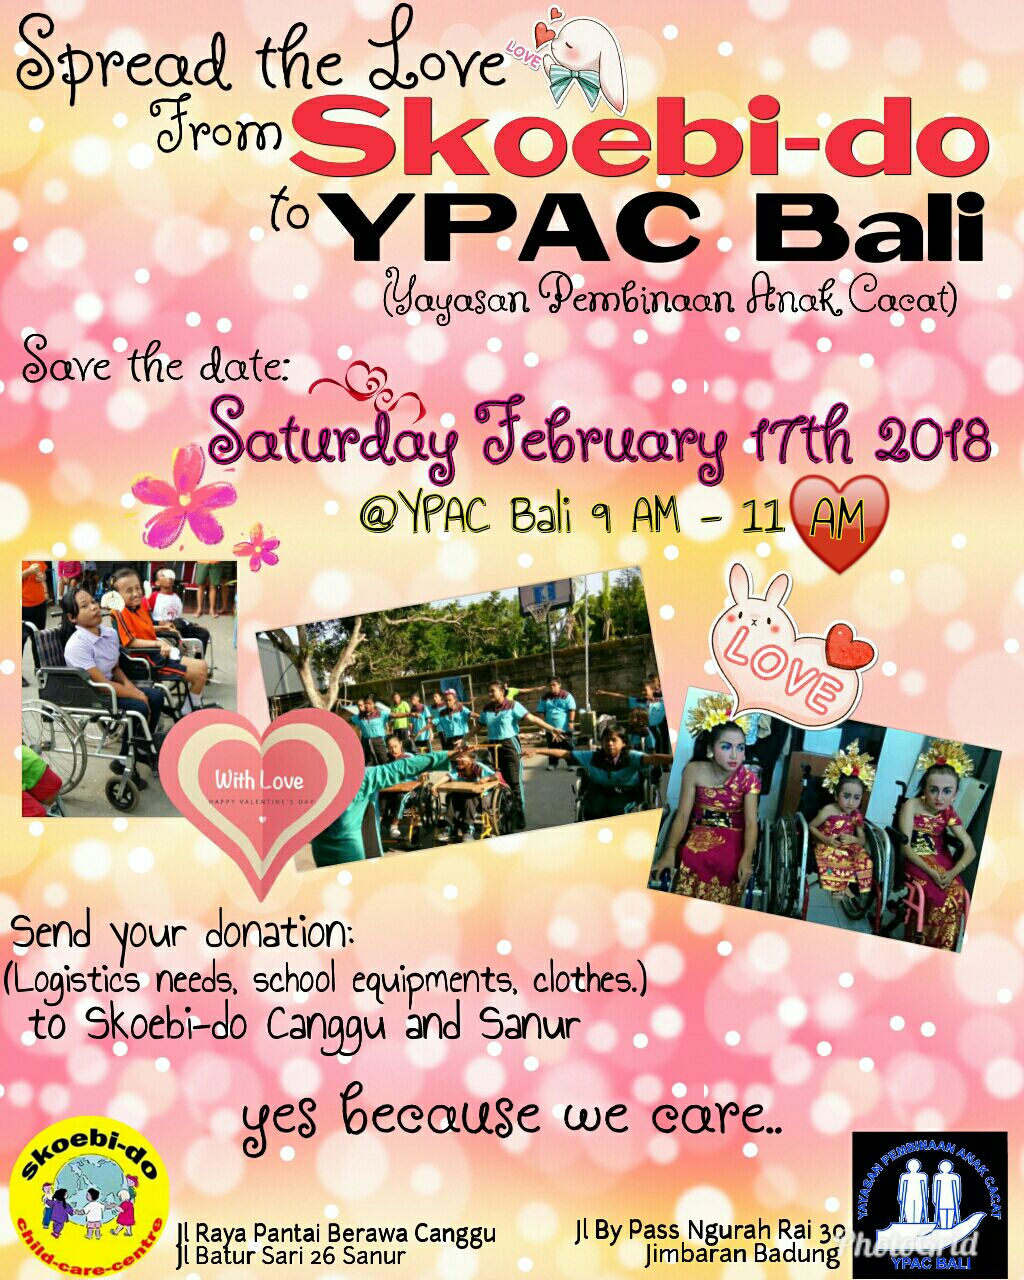 Spread the love from Skoebi-do to YPAC Bali